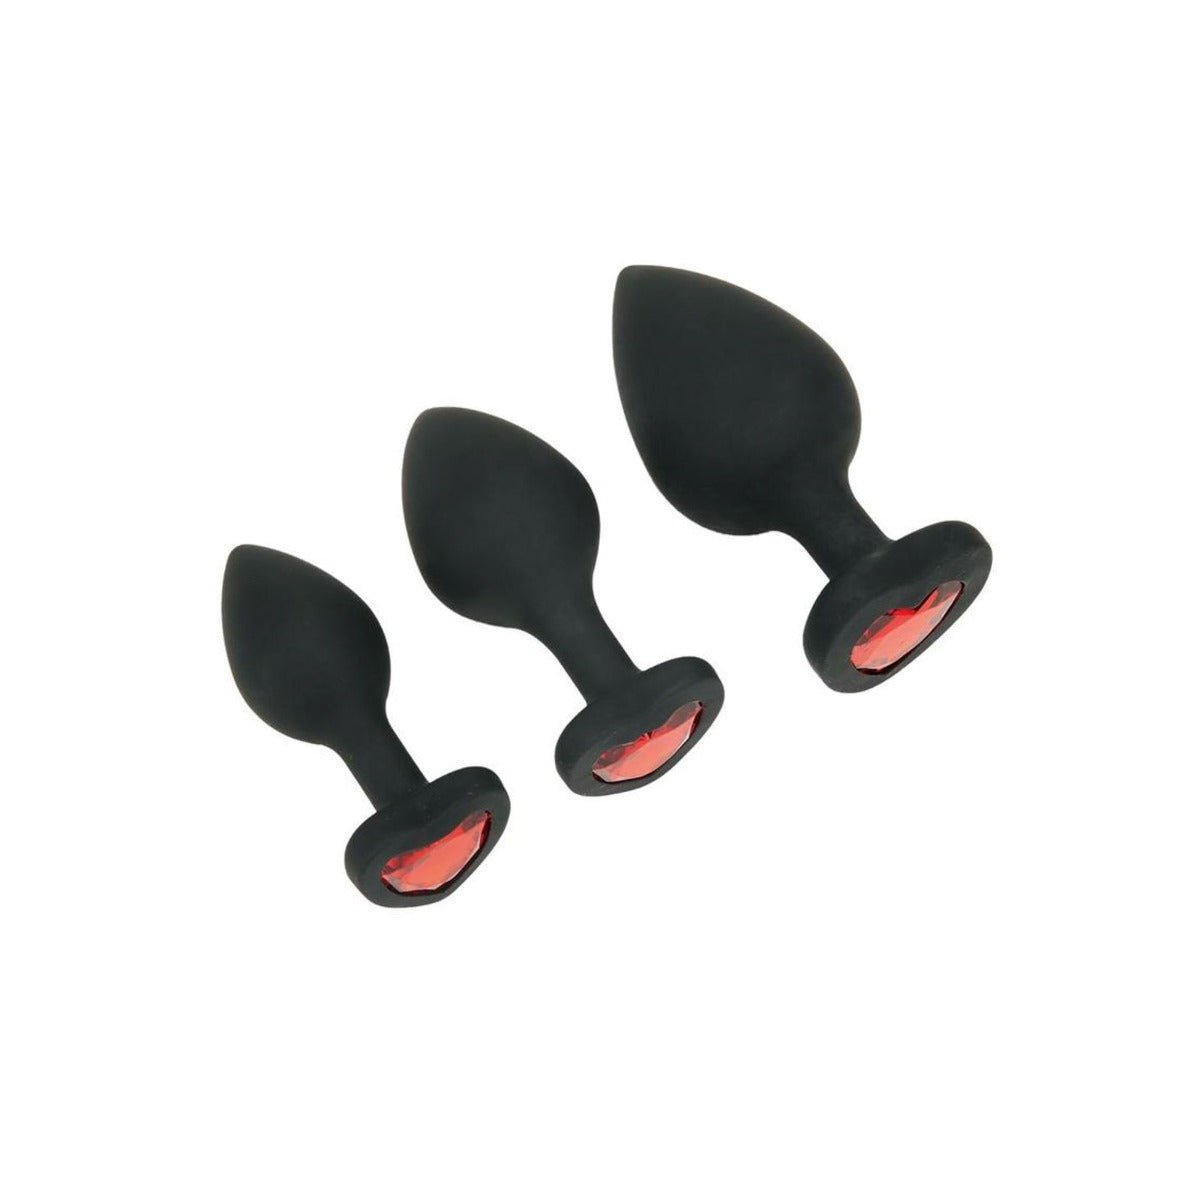 WhipSMART | HEARTBREAKER 3 Piece Silicone Crystal Heart Anal Training Set - Black & Red